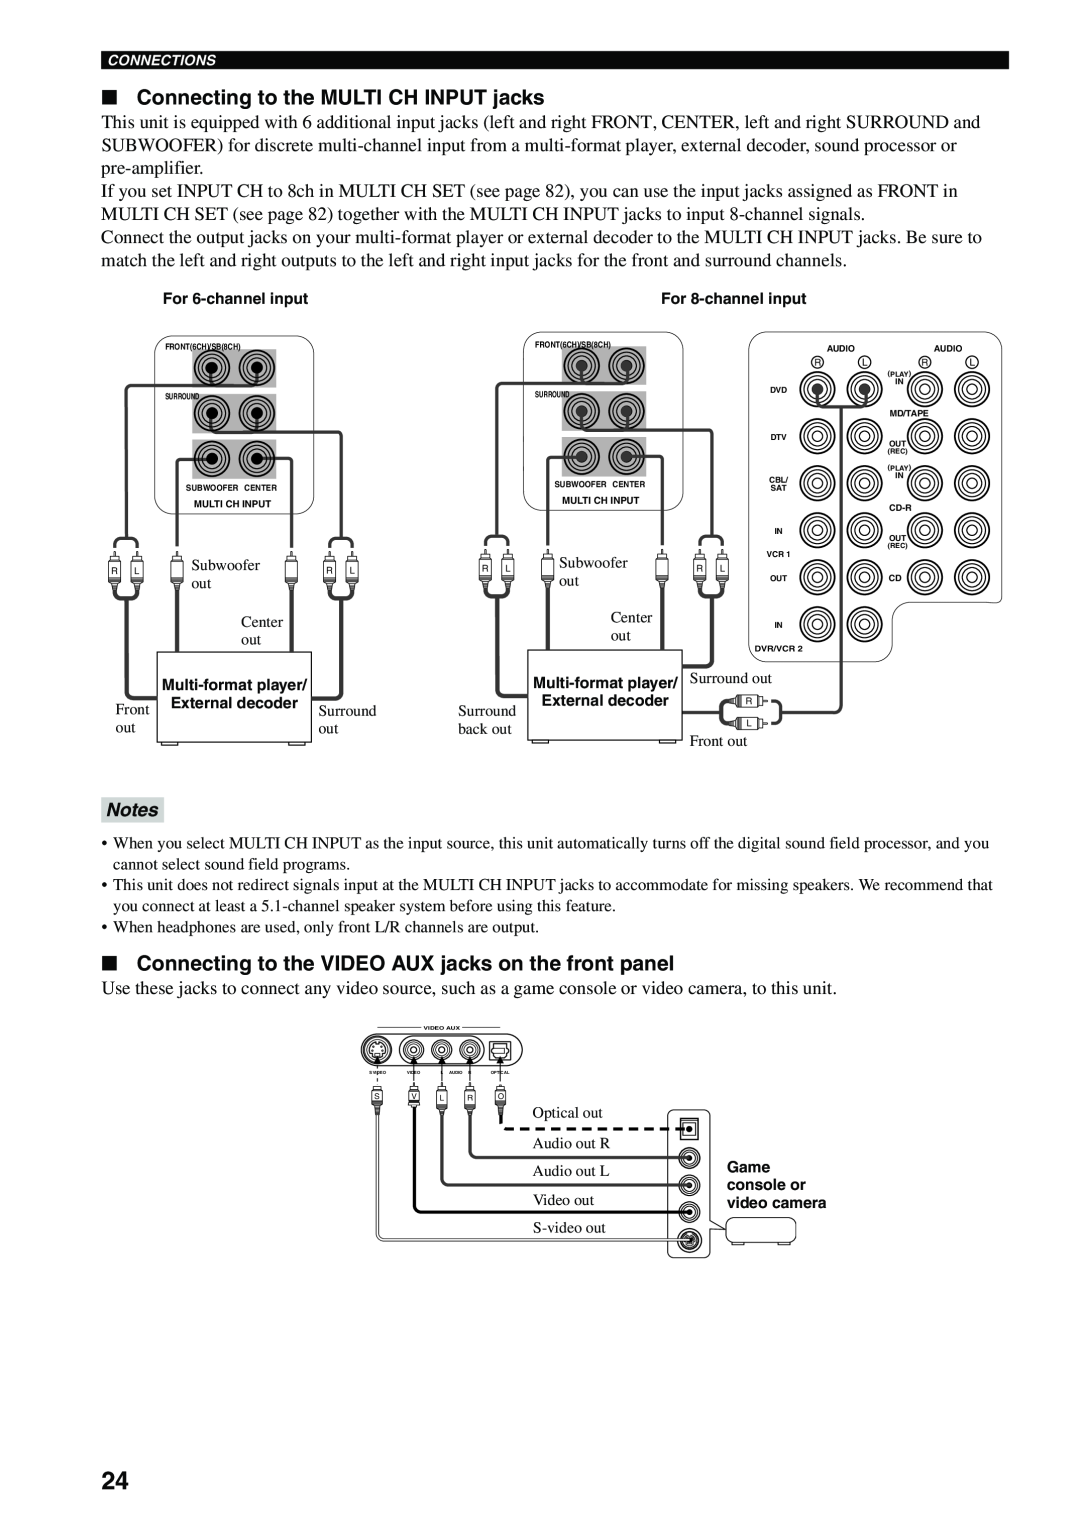 Yamaha HTR-5990 Connecting to the MULTI CH INPUT jacks, Notes, For 6-channelinput, Multi-formatplayer External decoder 